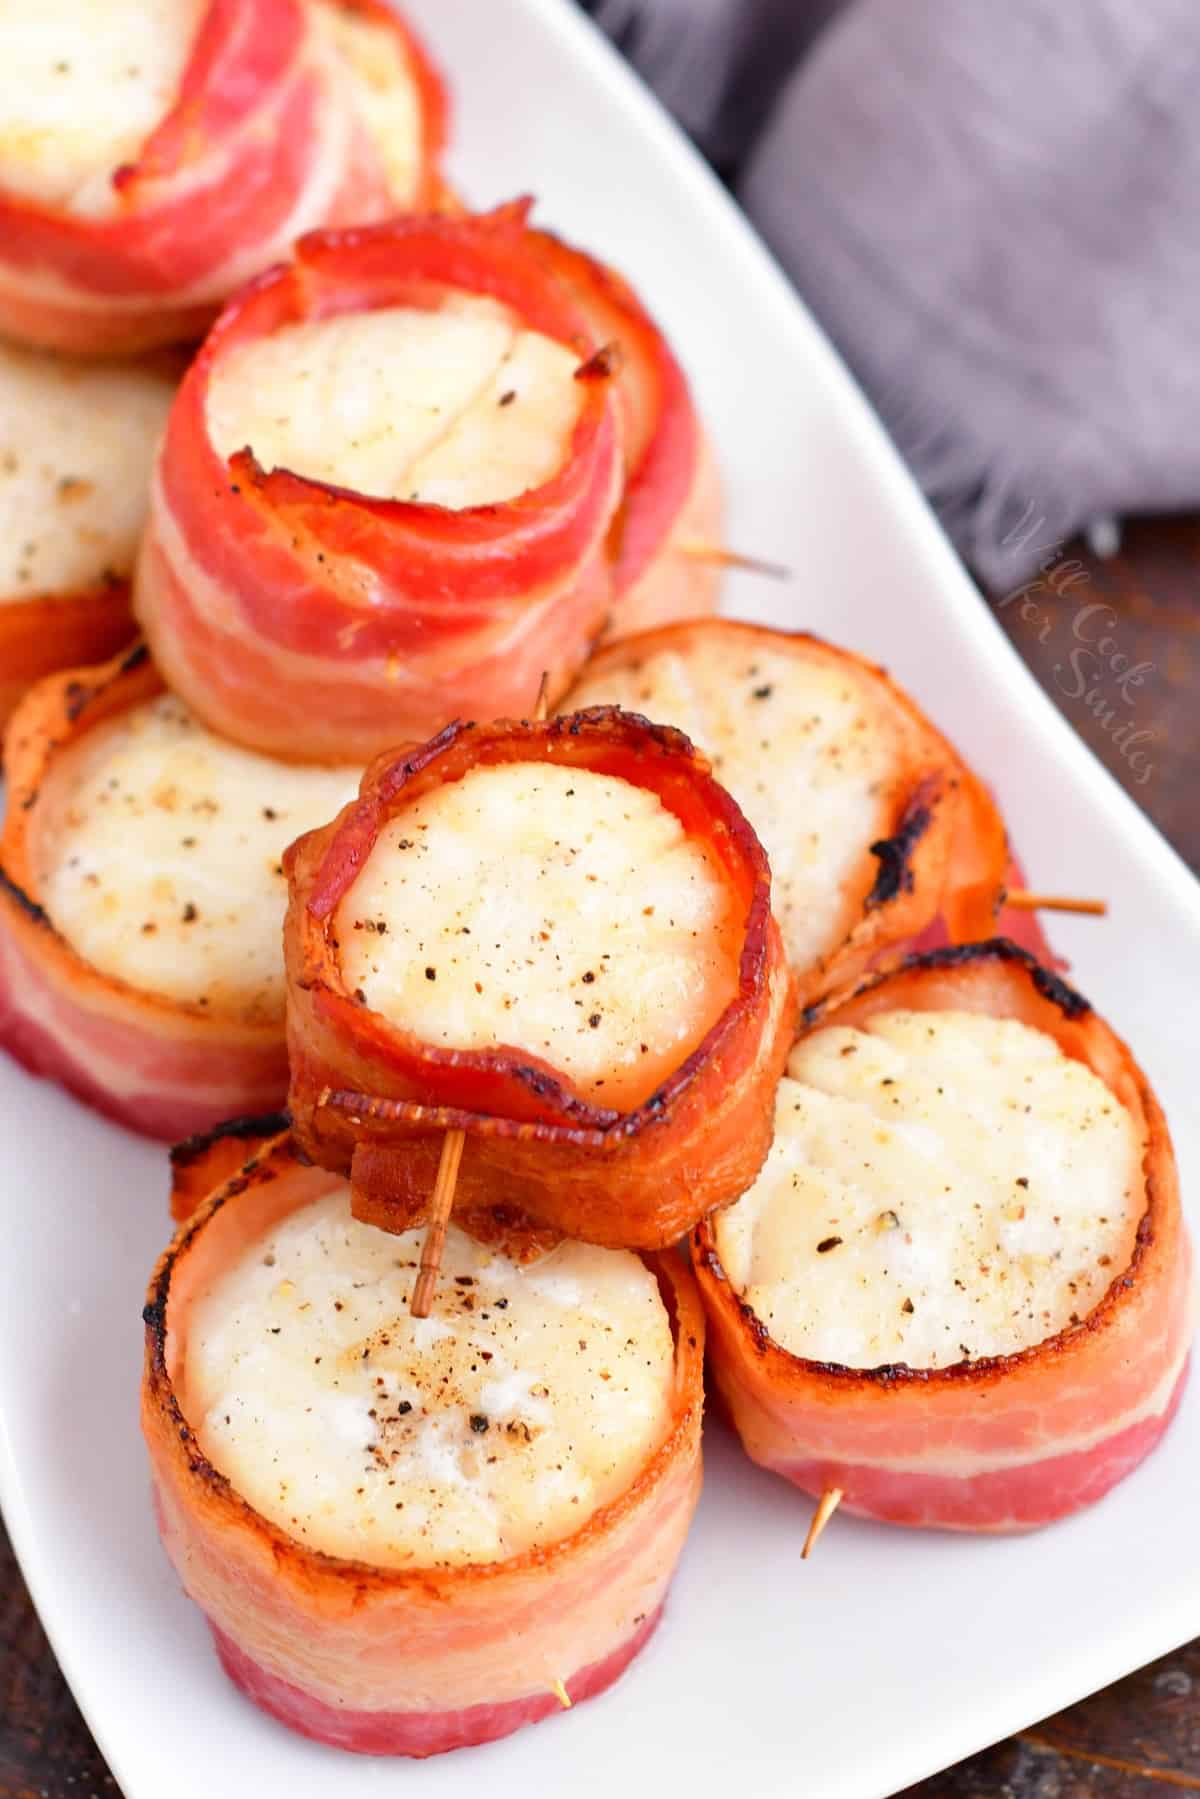 Scallops wrapped in bacon are piled on a rectangular white plate.